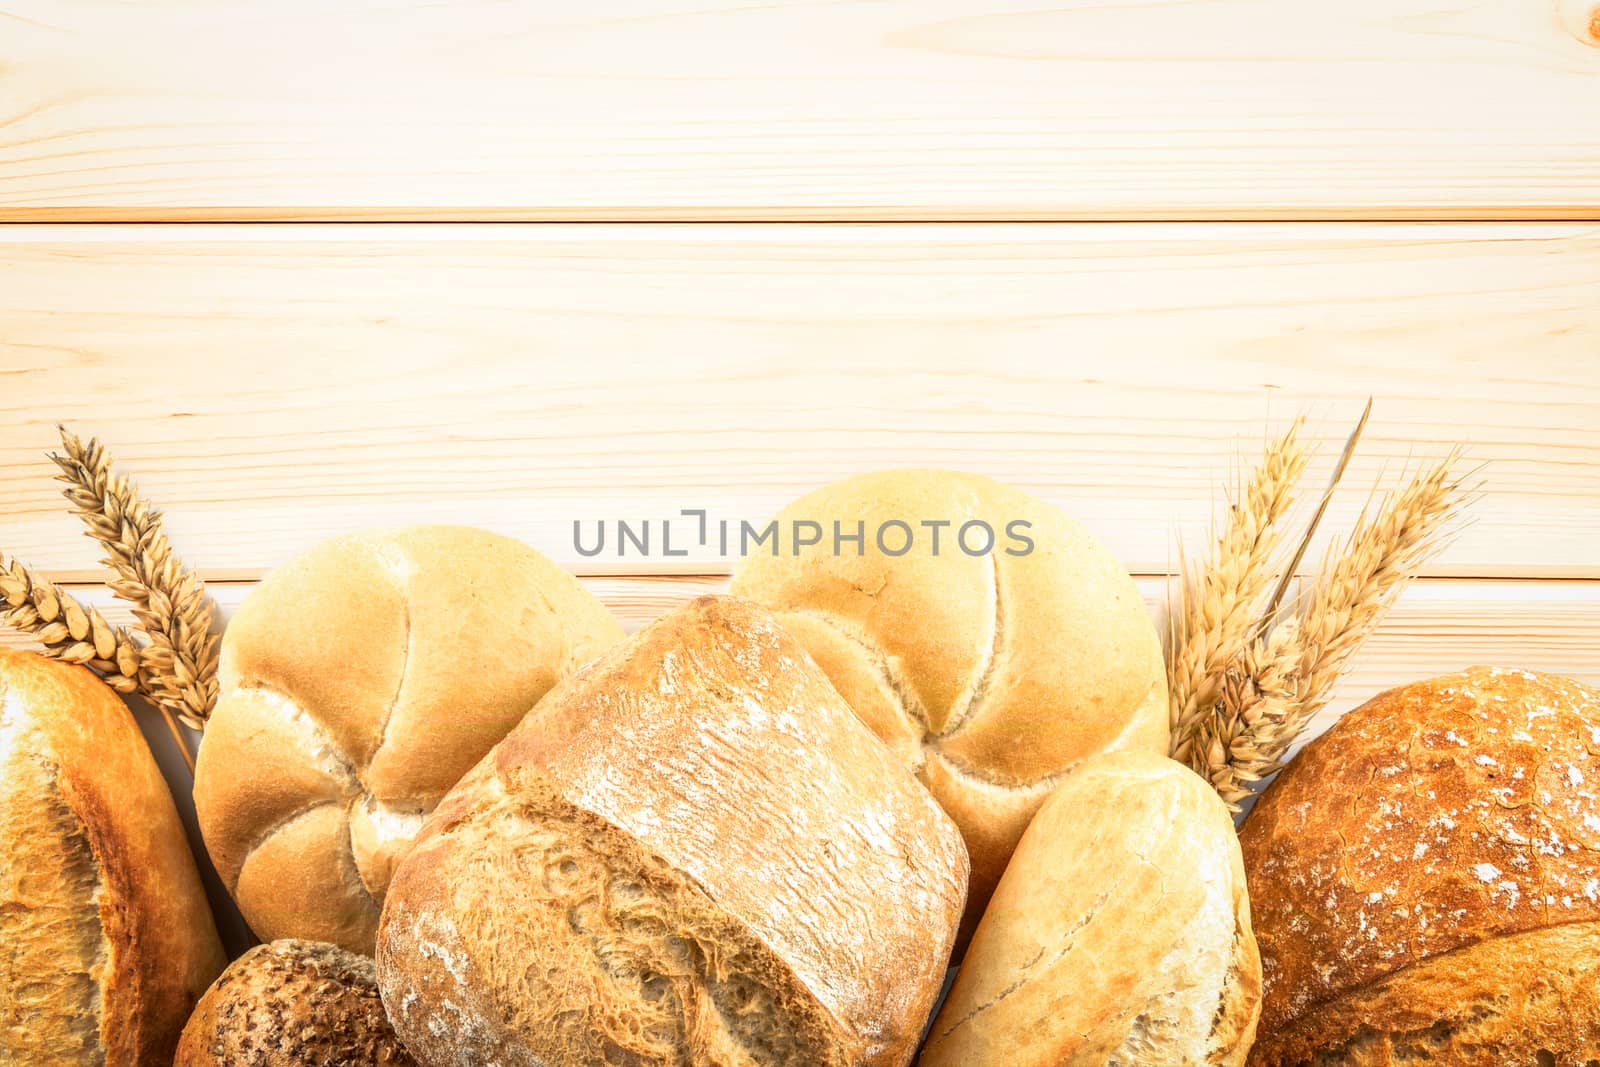 Top view of a variety fresh breads  on a wooden background with copy space.